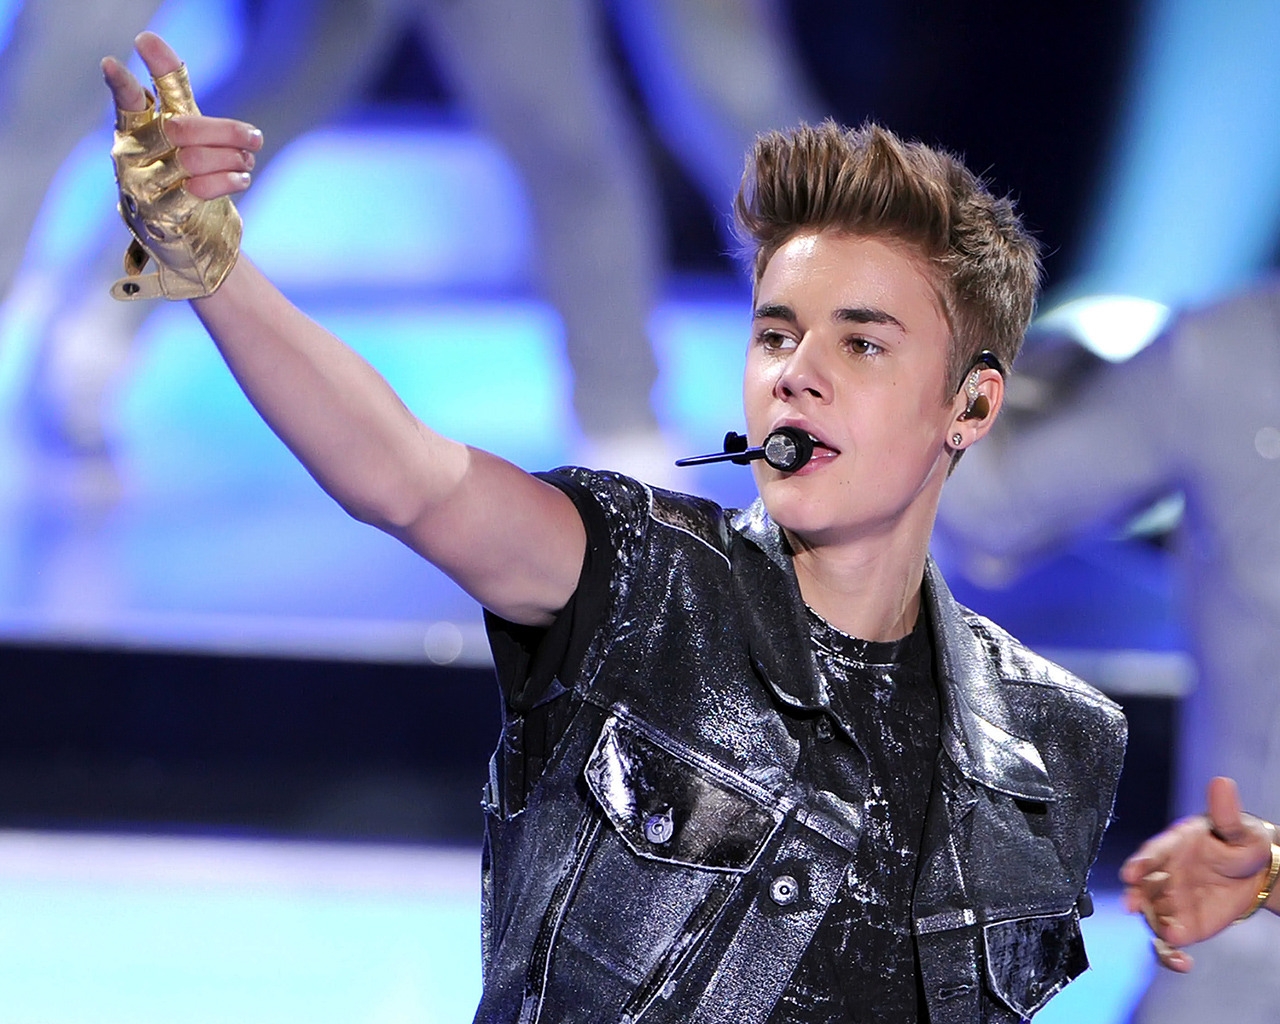 Justin Bieber on Stage for 1280 x 1024 resolution